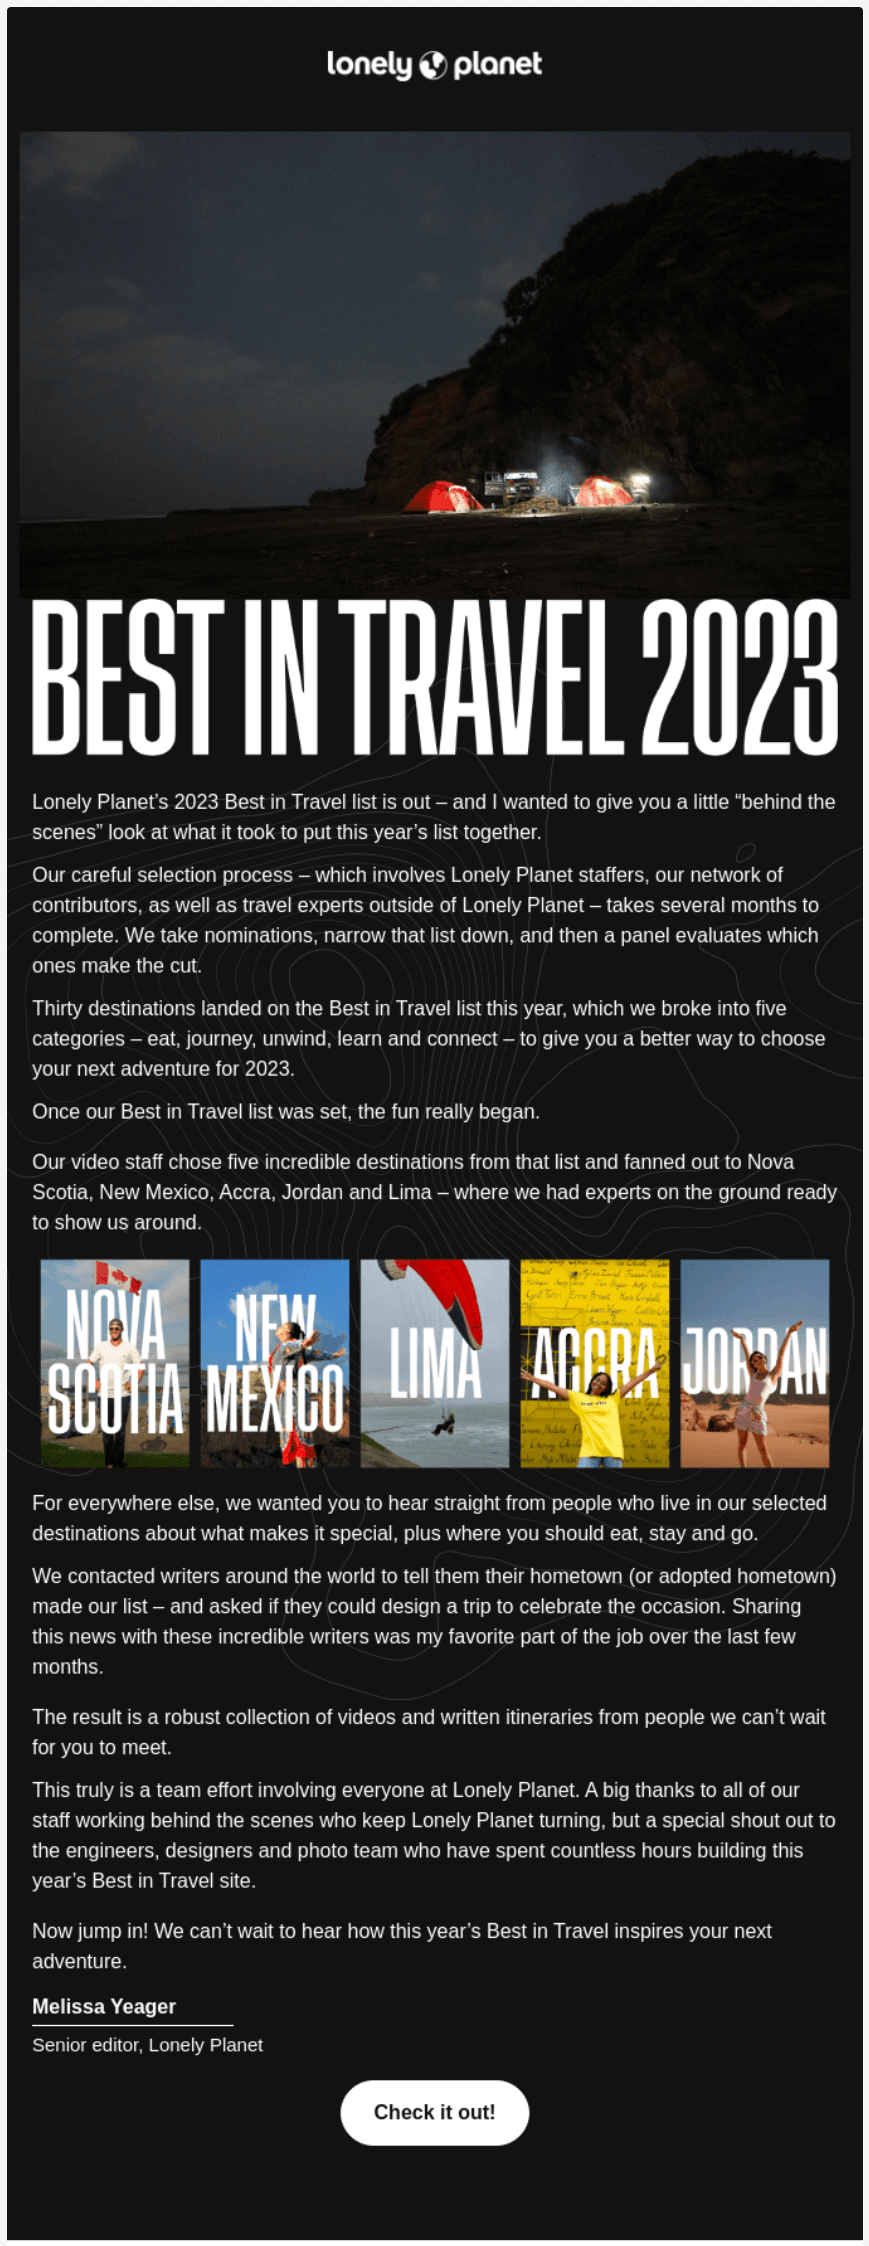 In an email, Lonely Planet announces the arrival of its Best in Travel guide, shares the contents and the story behind its creation